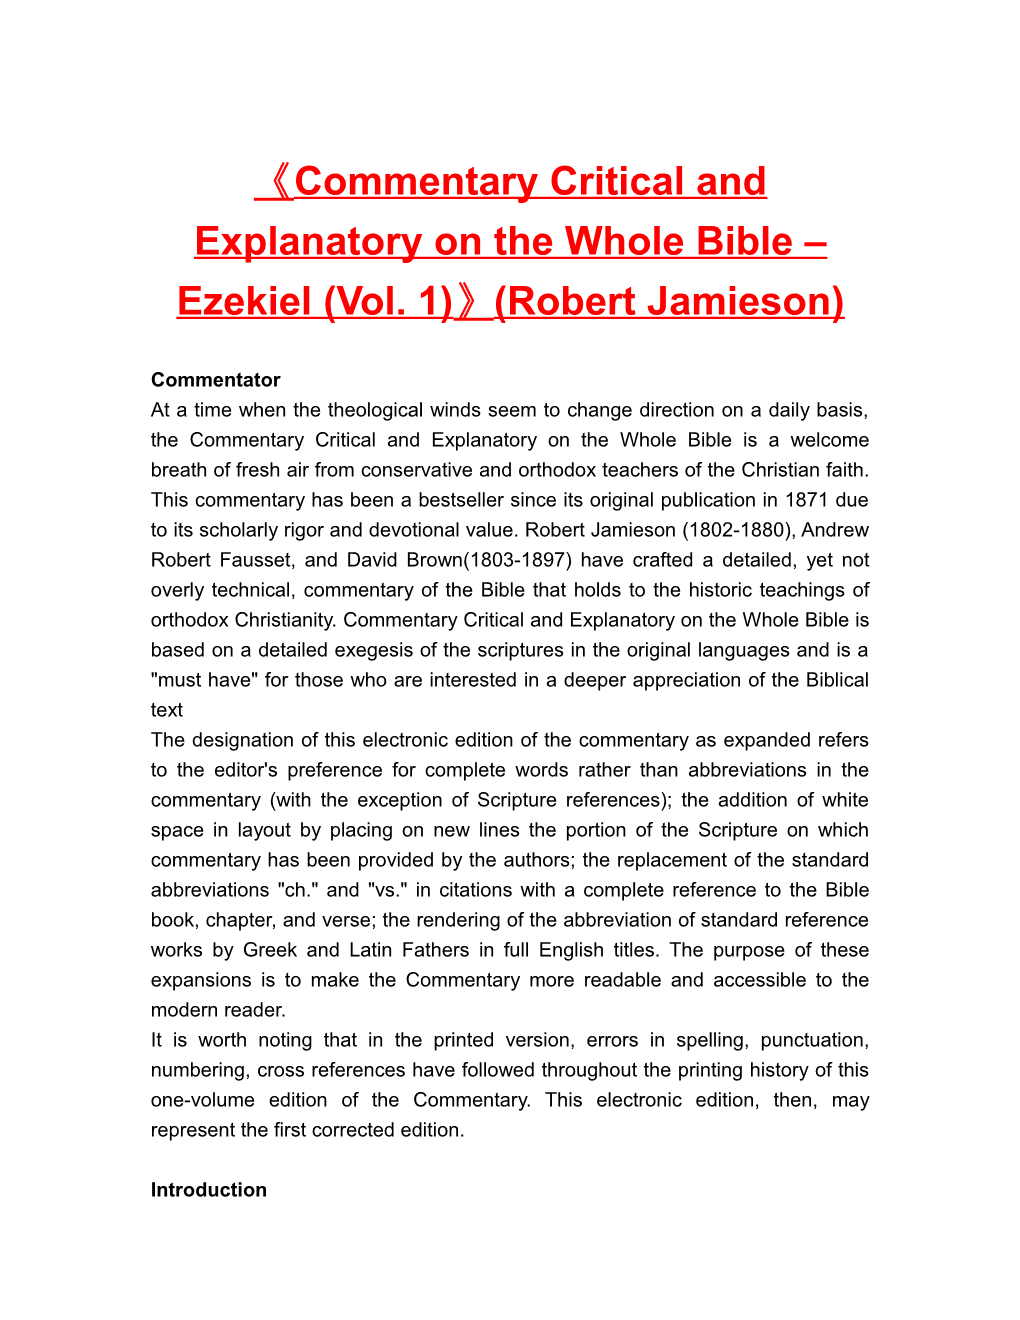 Commentary Critical and Explanatory on the Whole Bible Ezekiel (Vol. 1) (Robert Jamieson)